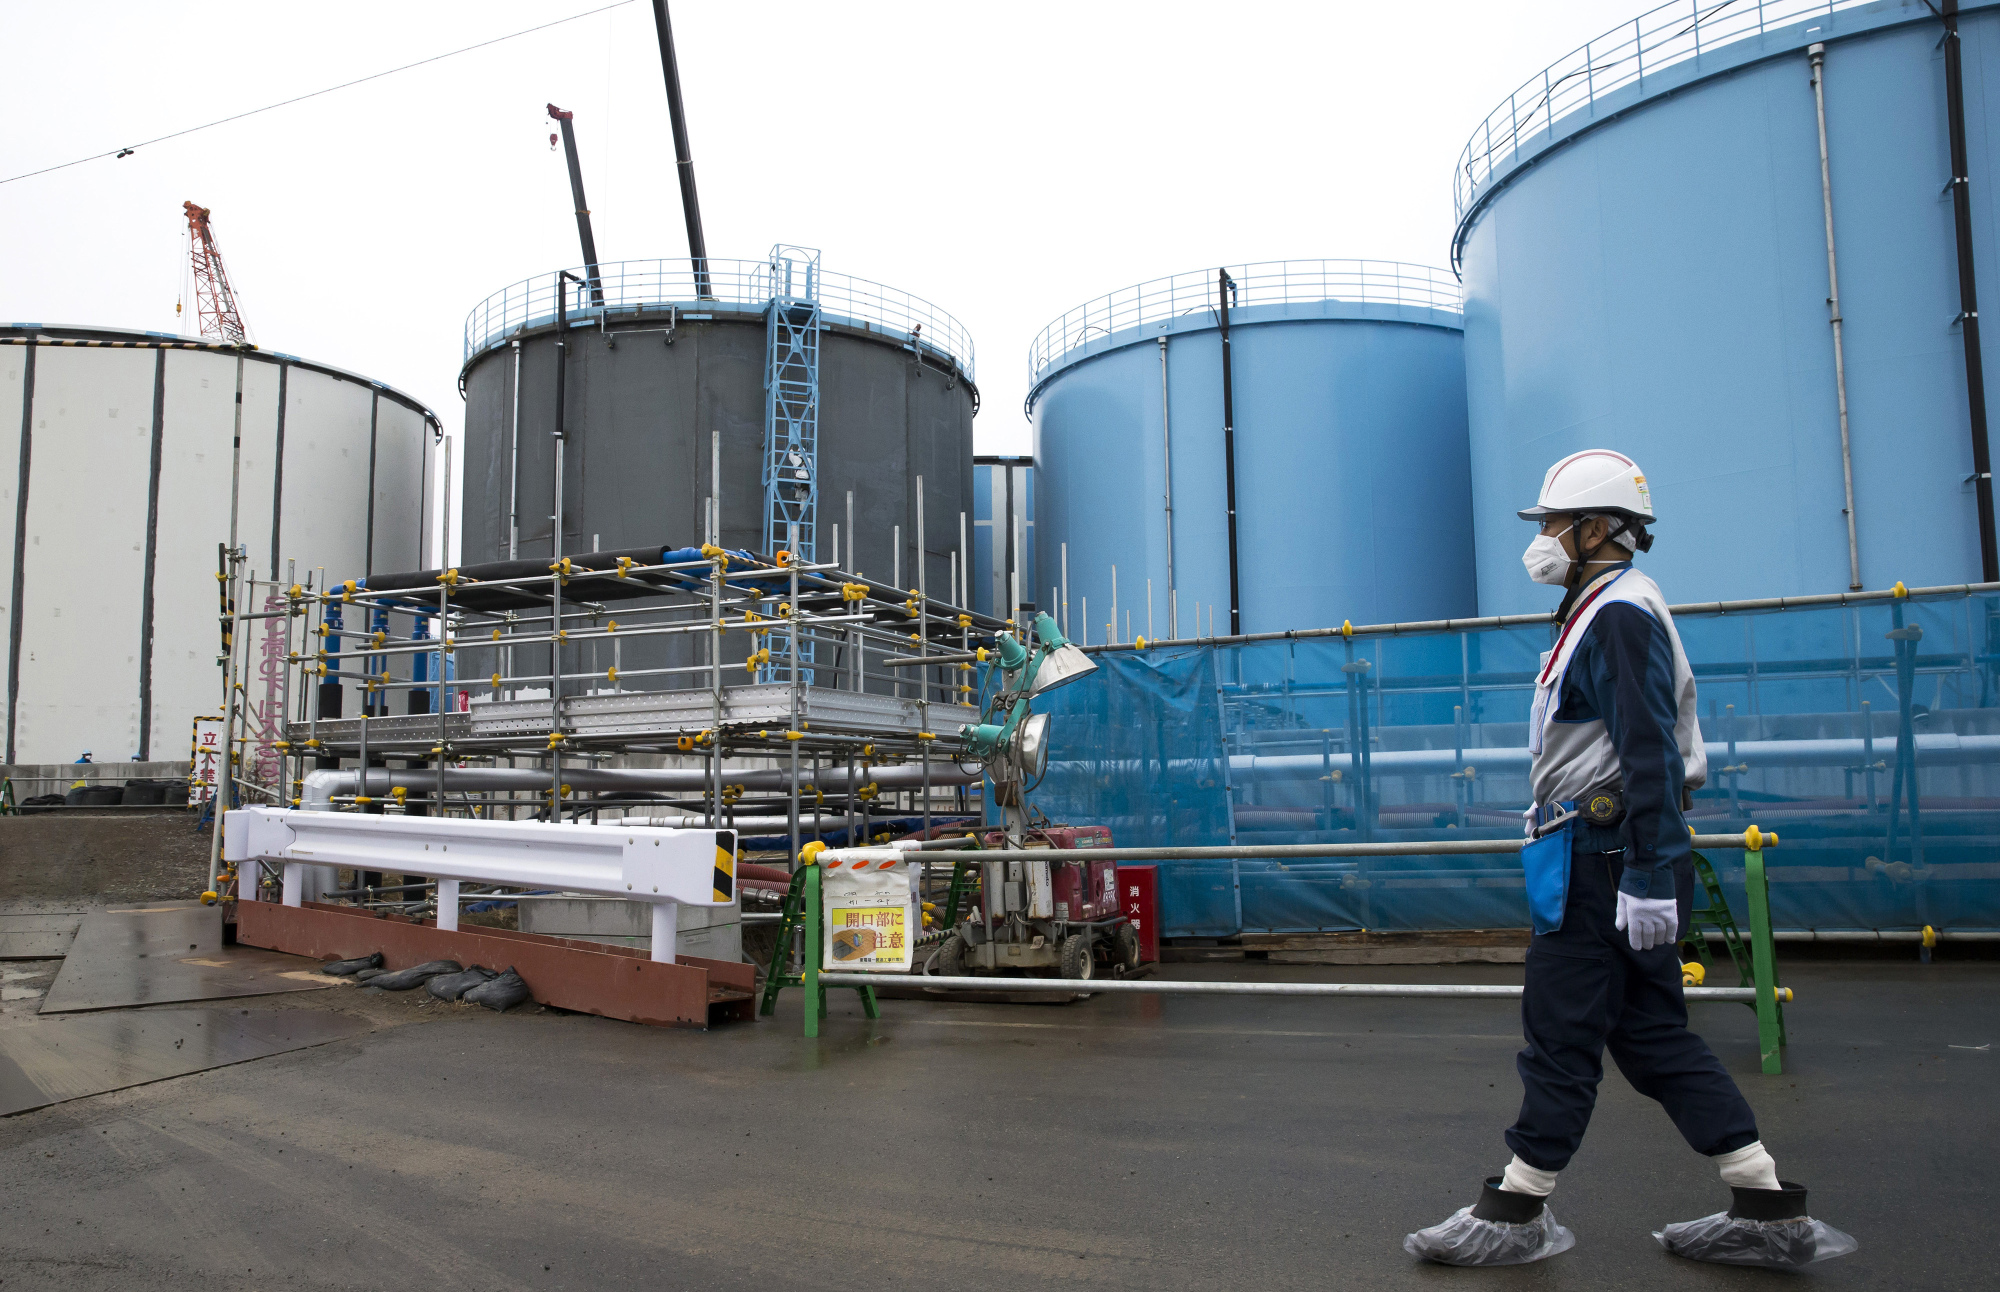 An employee walks past storage tanks for contaminated water at the tsunami-crippled Fukushima No. 1 nuclear power plant of the Tokyo Electric Power Co. in Okuma, Fukushima Prefecture, in February. Tepco needs to release the water &#8212; which contains radioactive tritium that is not removable but considered not harmful in small amounts &#8212; into the Pacific Ocean, Chairman Takashi Kawamura said. | TOMOHIRO OHSUMI / POOL PHOTO / VIA AP, FILE